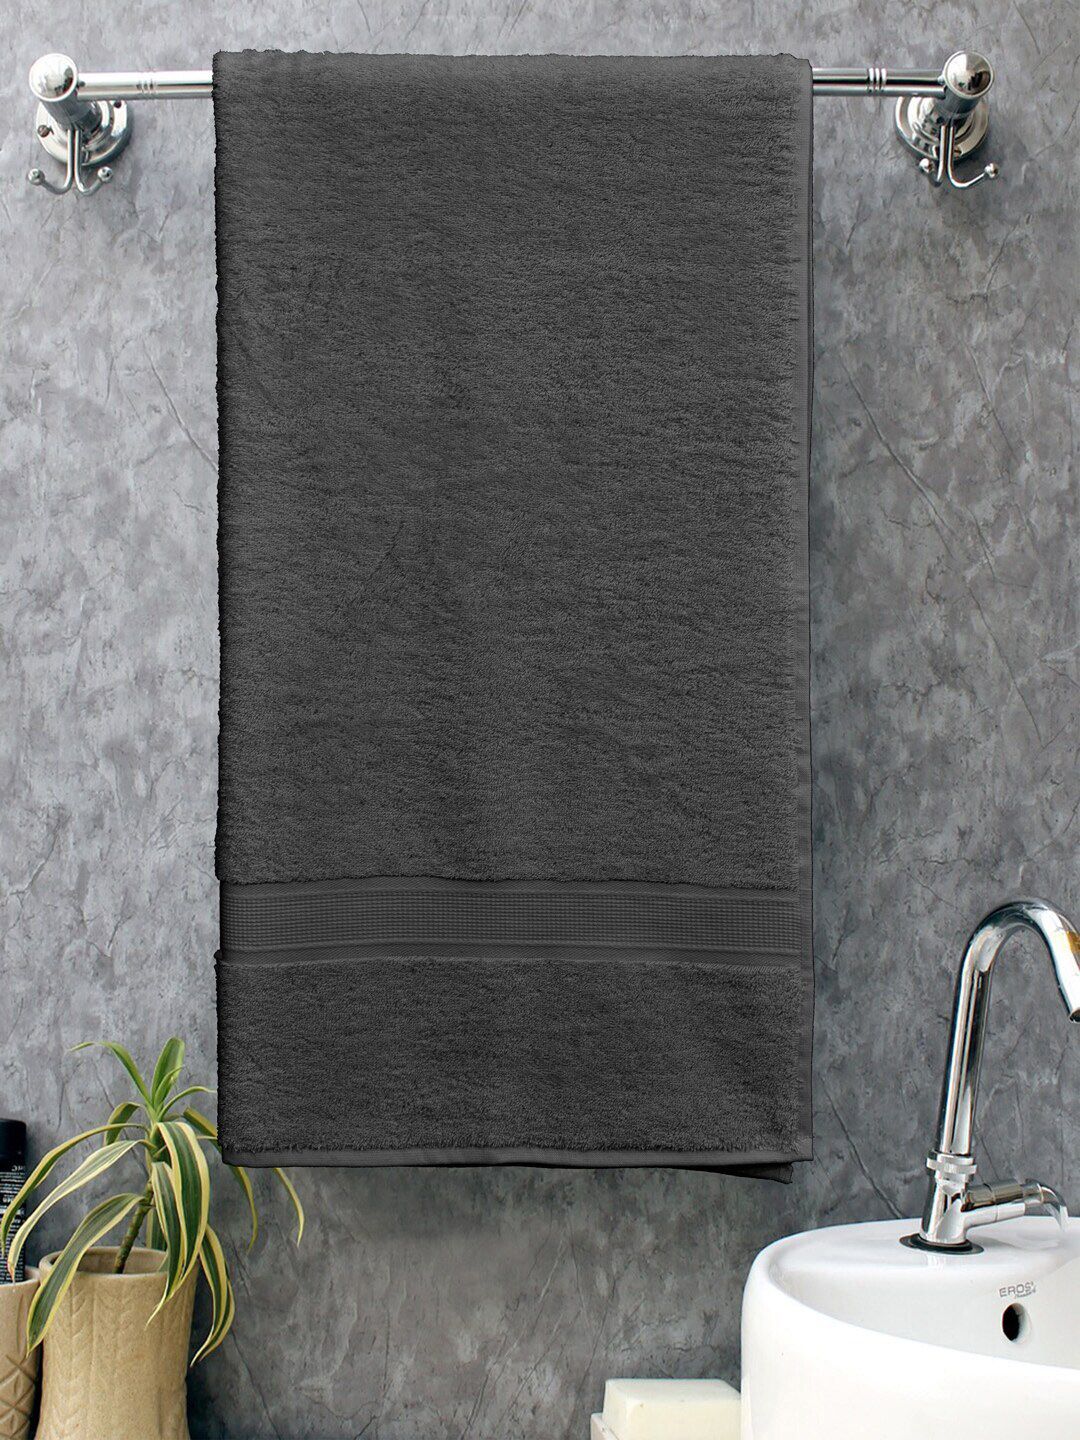 BOMBAY DYEING Grey Solid 550 GSM Cotton Bath Towel Price in India